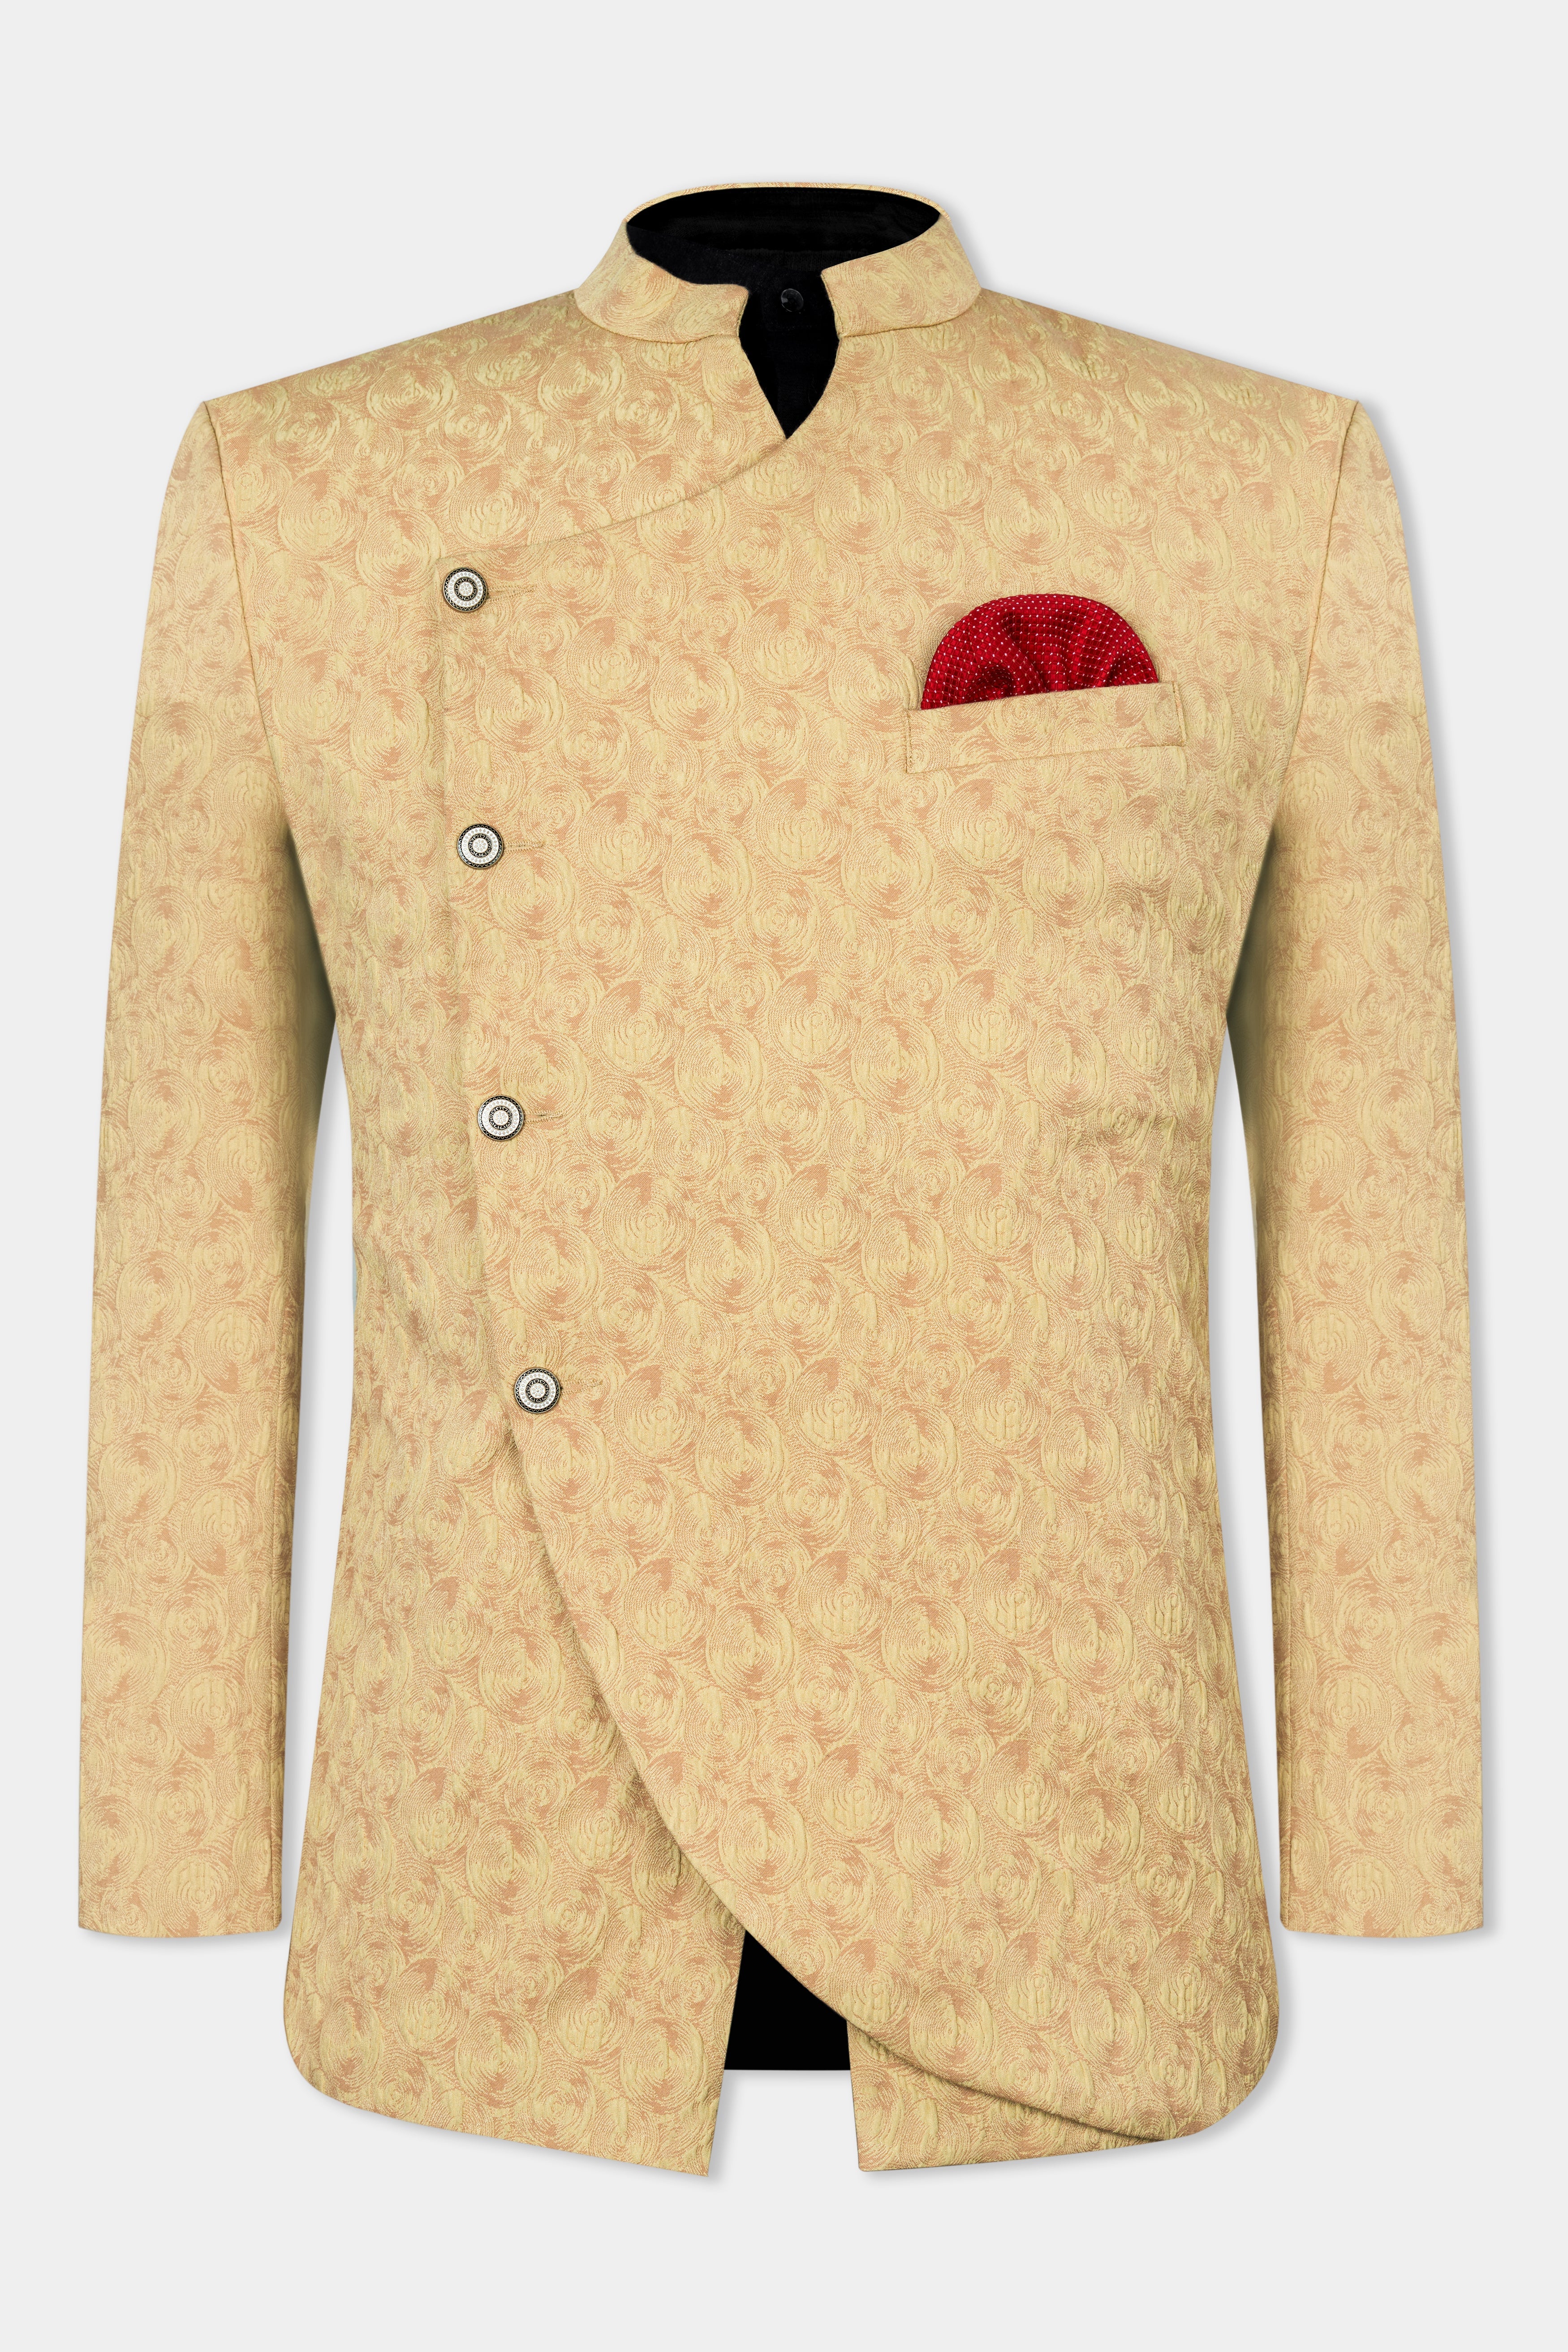 Putty Brown Textured Cross Buttoned Bandhgala Designer Blazer BL2866-D432-36, BL2866-D432-38, BL2866-D432-40, BL2866-D432-42, BL2866-D432-44, BL2866-D432-46, BL2866-D432-48, BL2866-D432-50, BL2866-D432-66, BL2866-D432-54, BL2866-D432-56, BL2866-D432-58, BL2866-D432-60